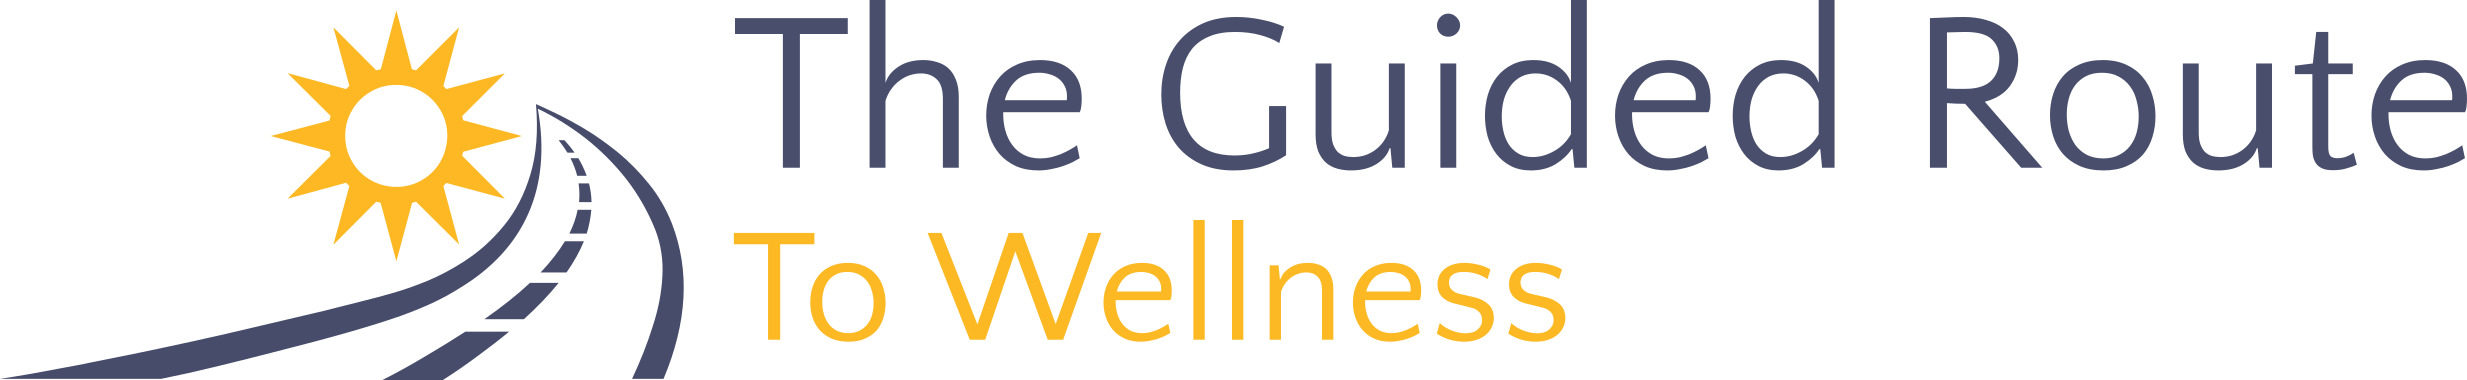 The Guided Route to Wellness